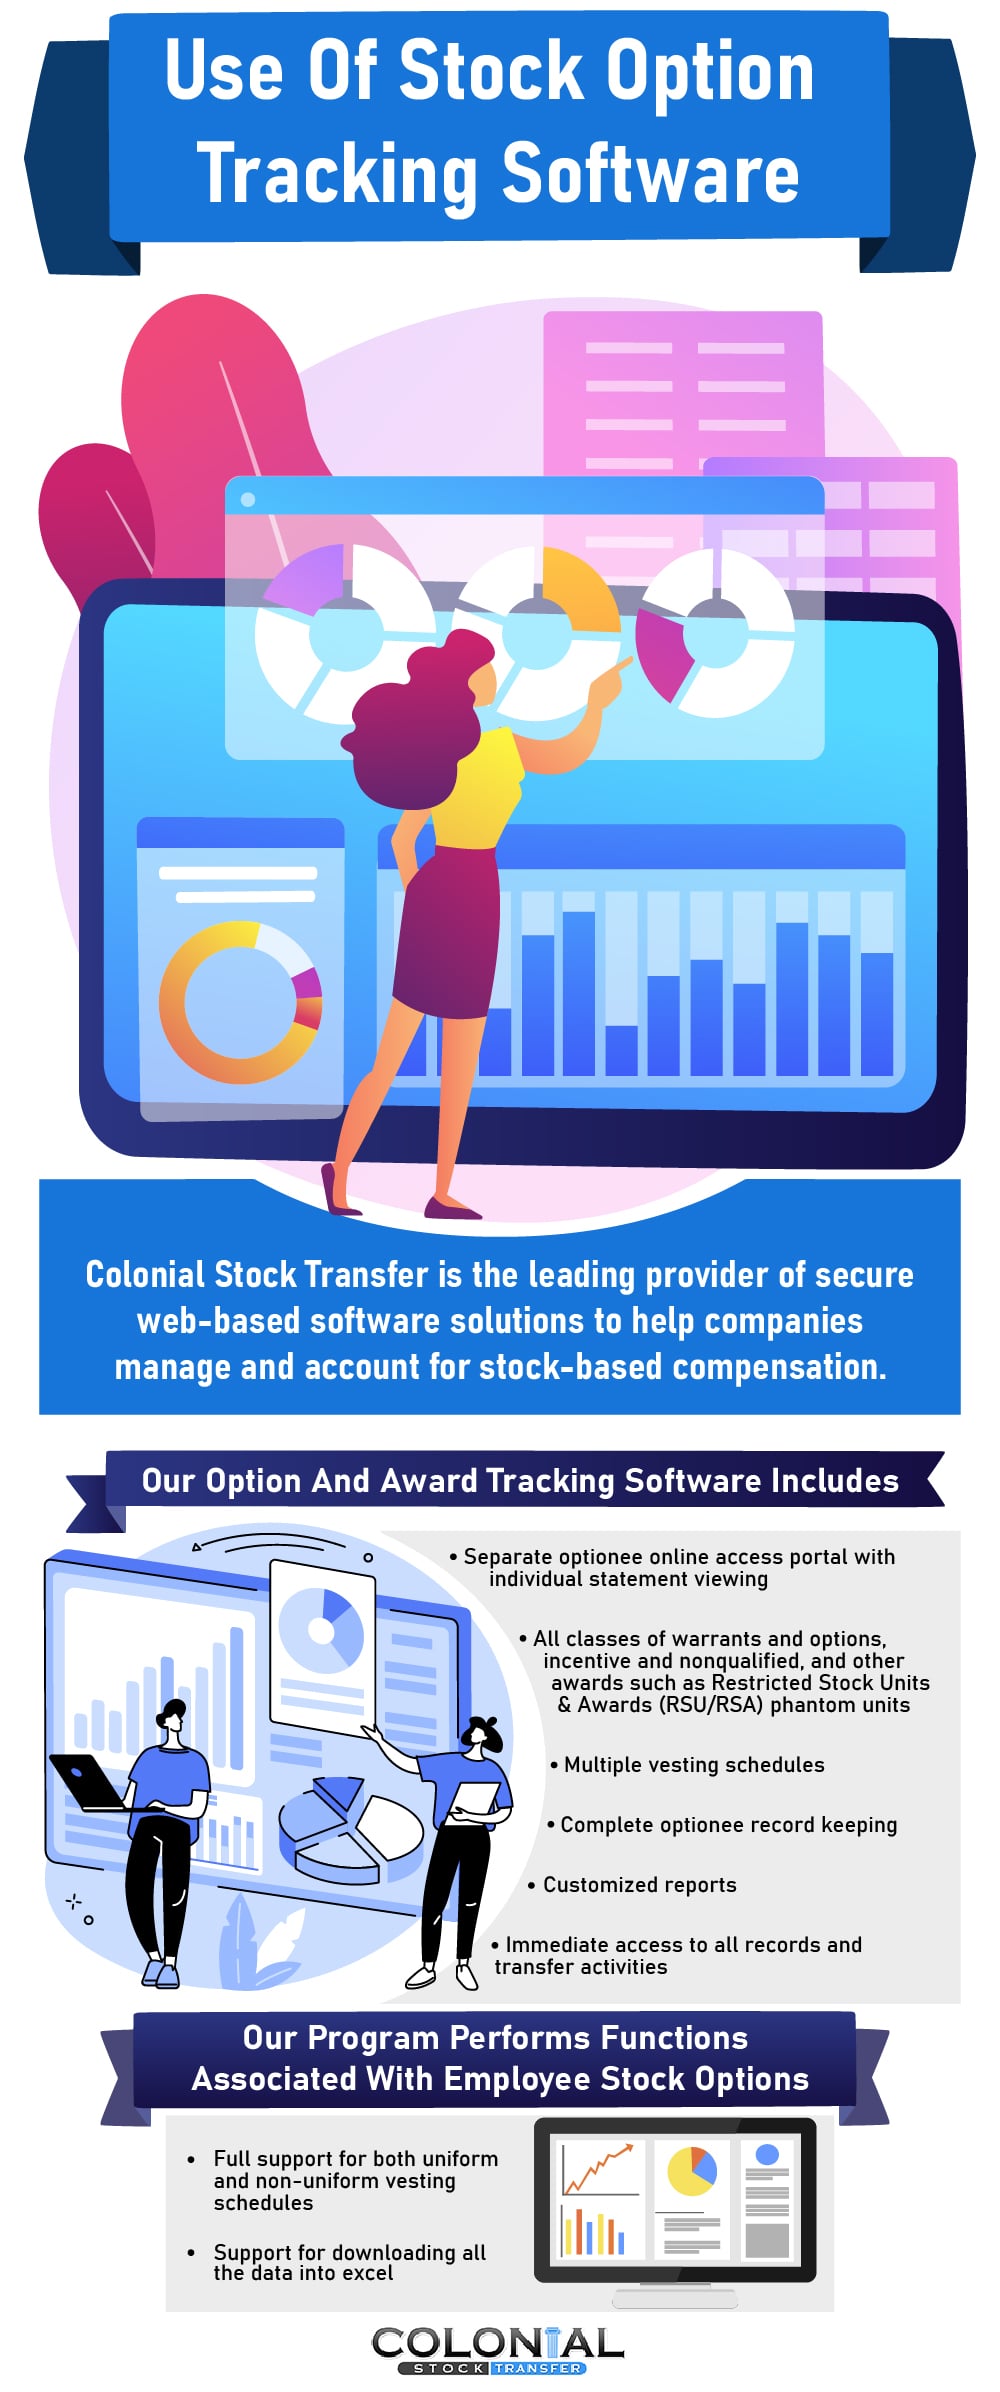 Use of Stock Option Software